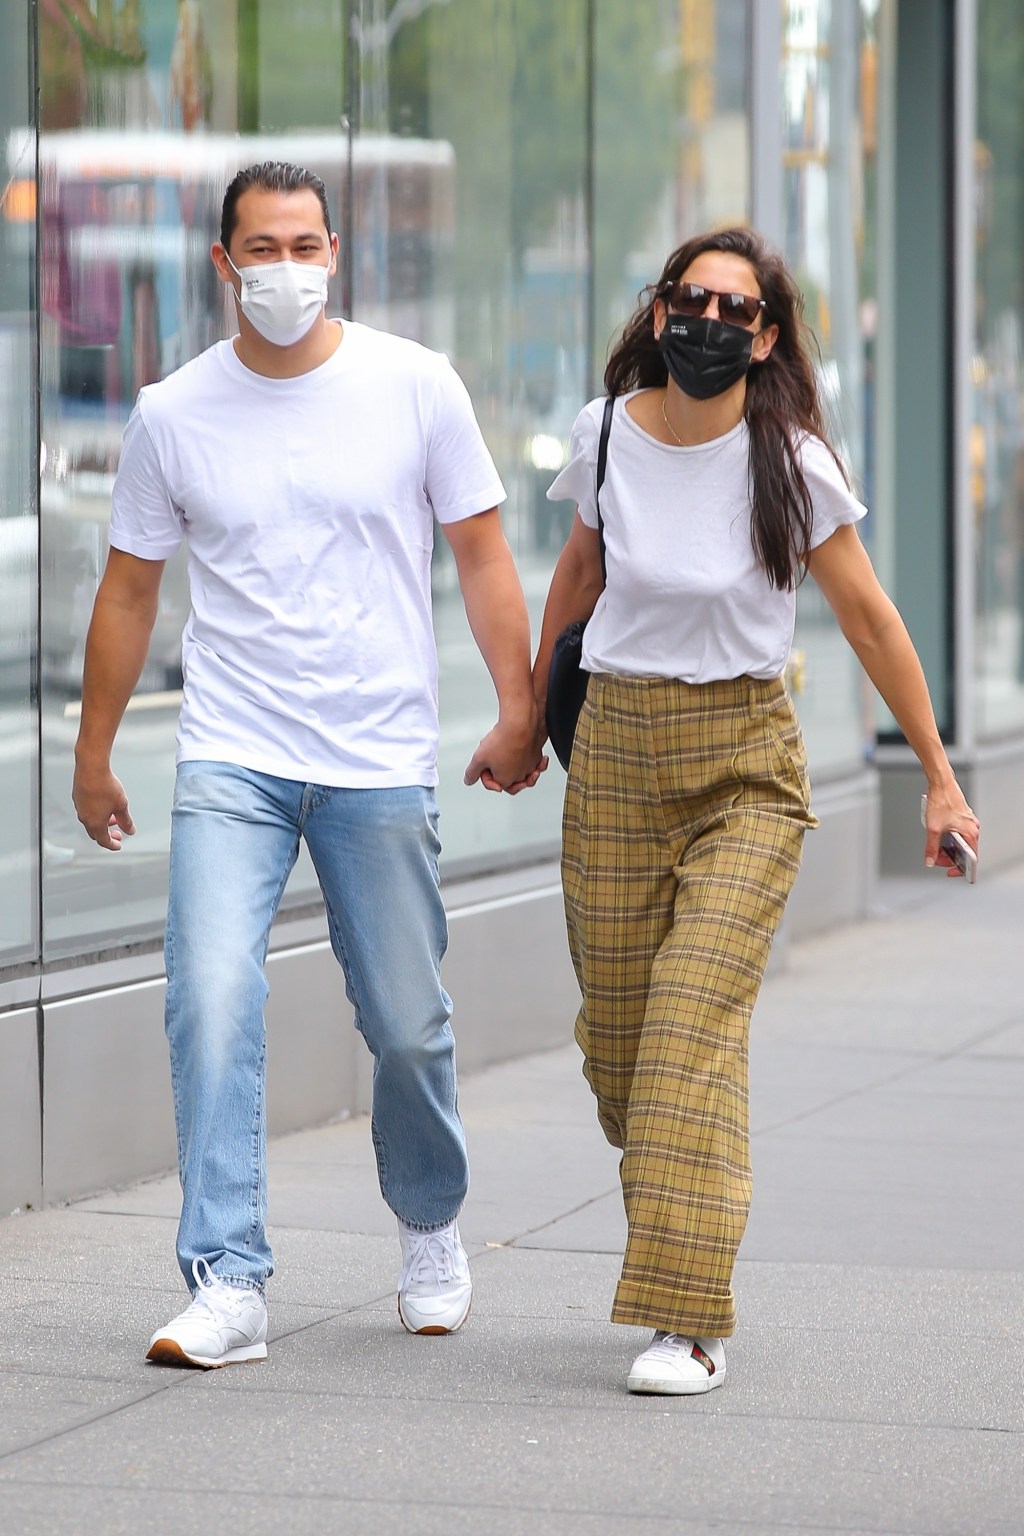 Lovebirds Katie Holmes and Emilio Vitolo Jr hold hands strolling the streets of New York